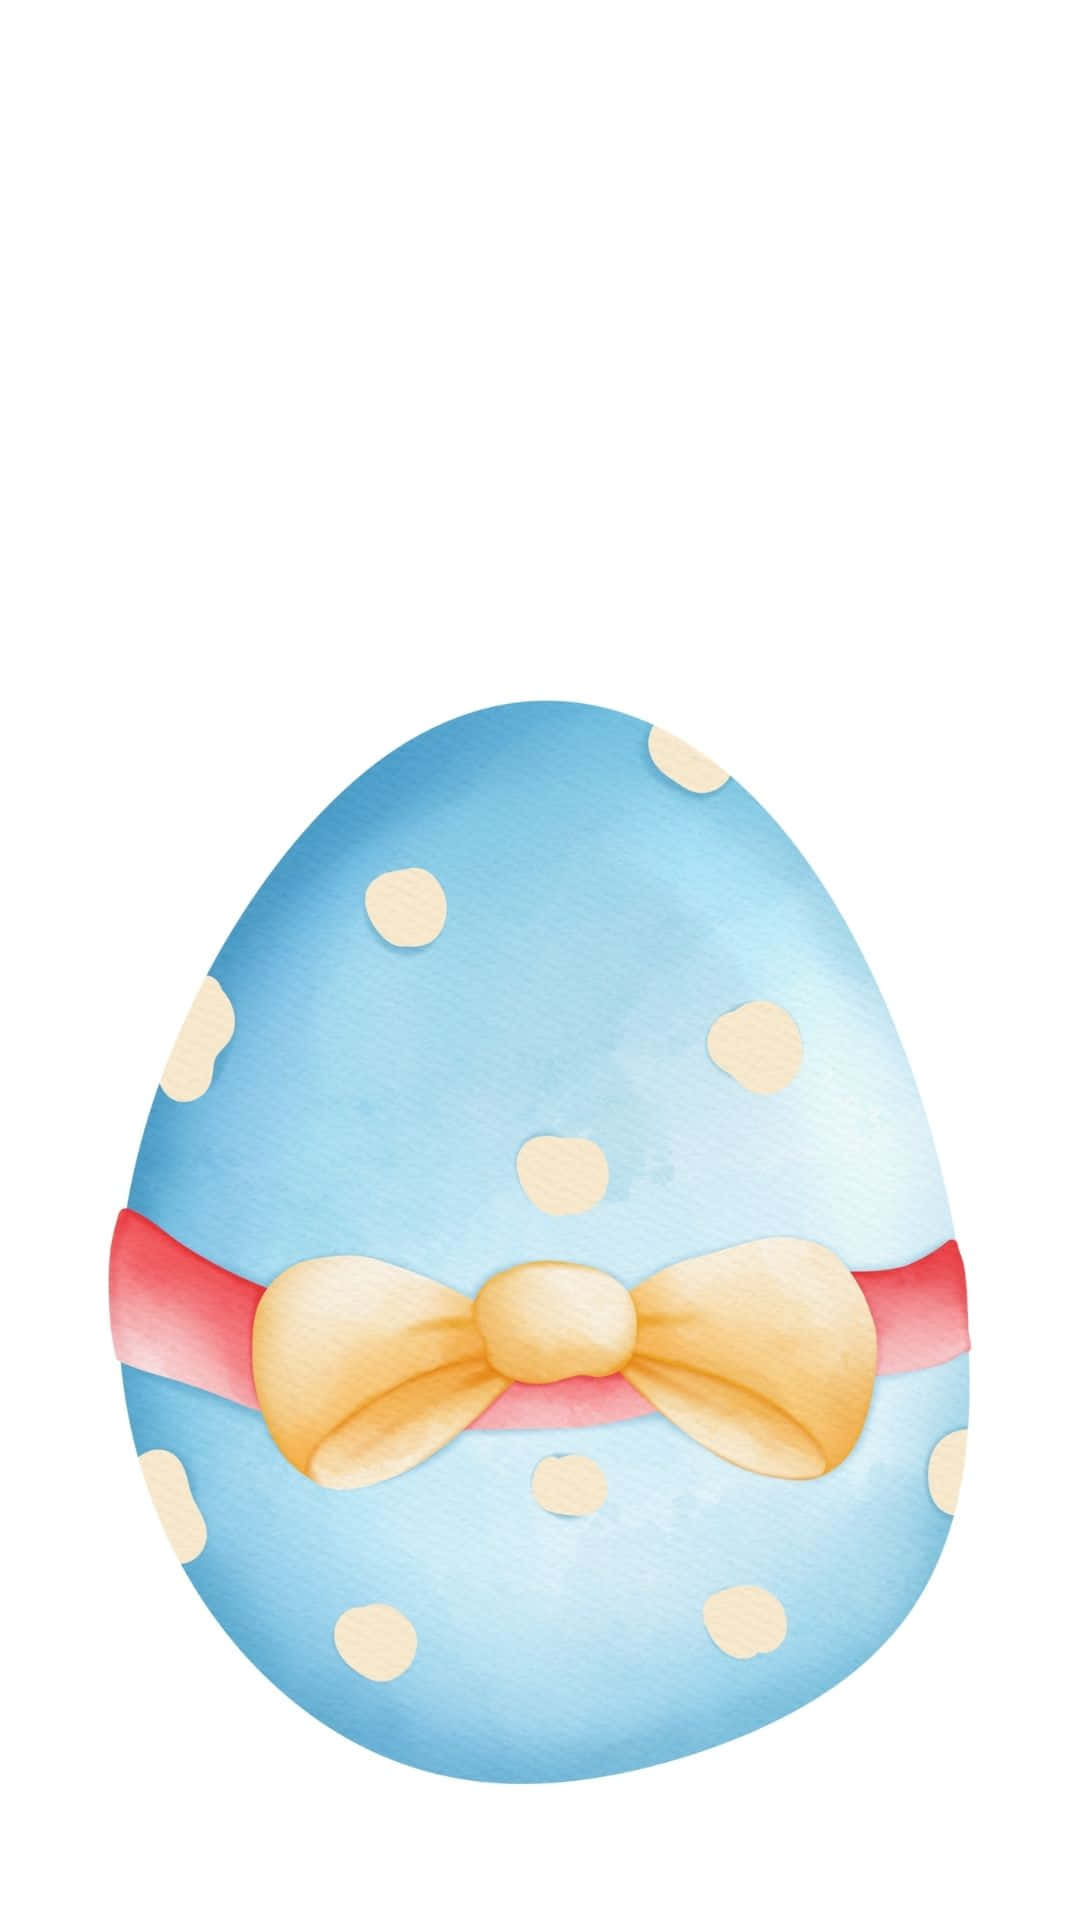 A Blue And White Egg With Polka Dots Wallpaper